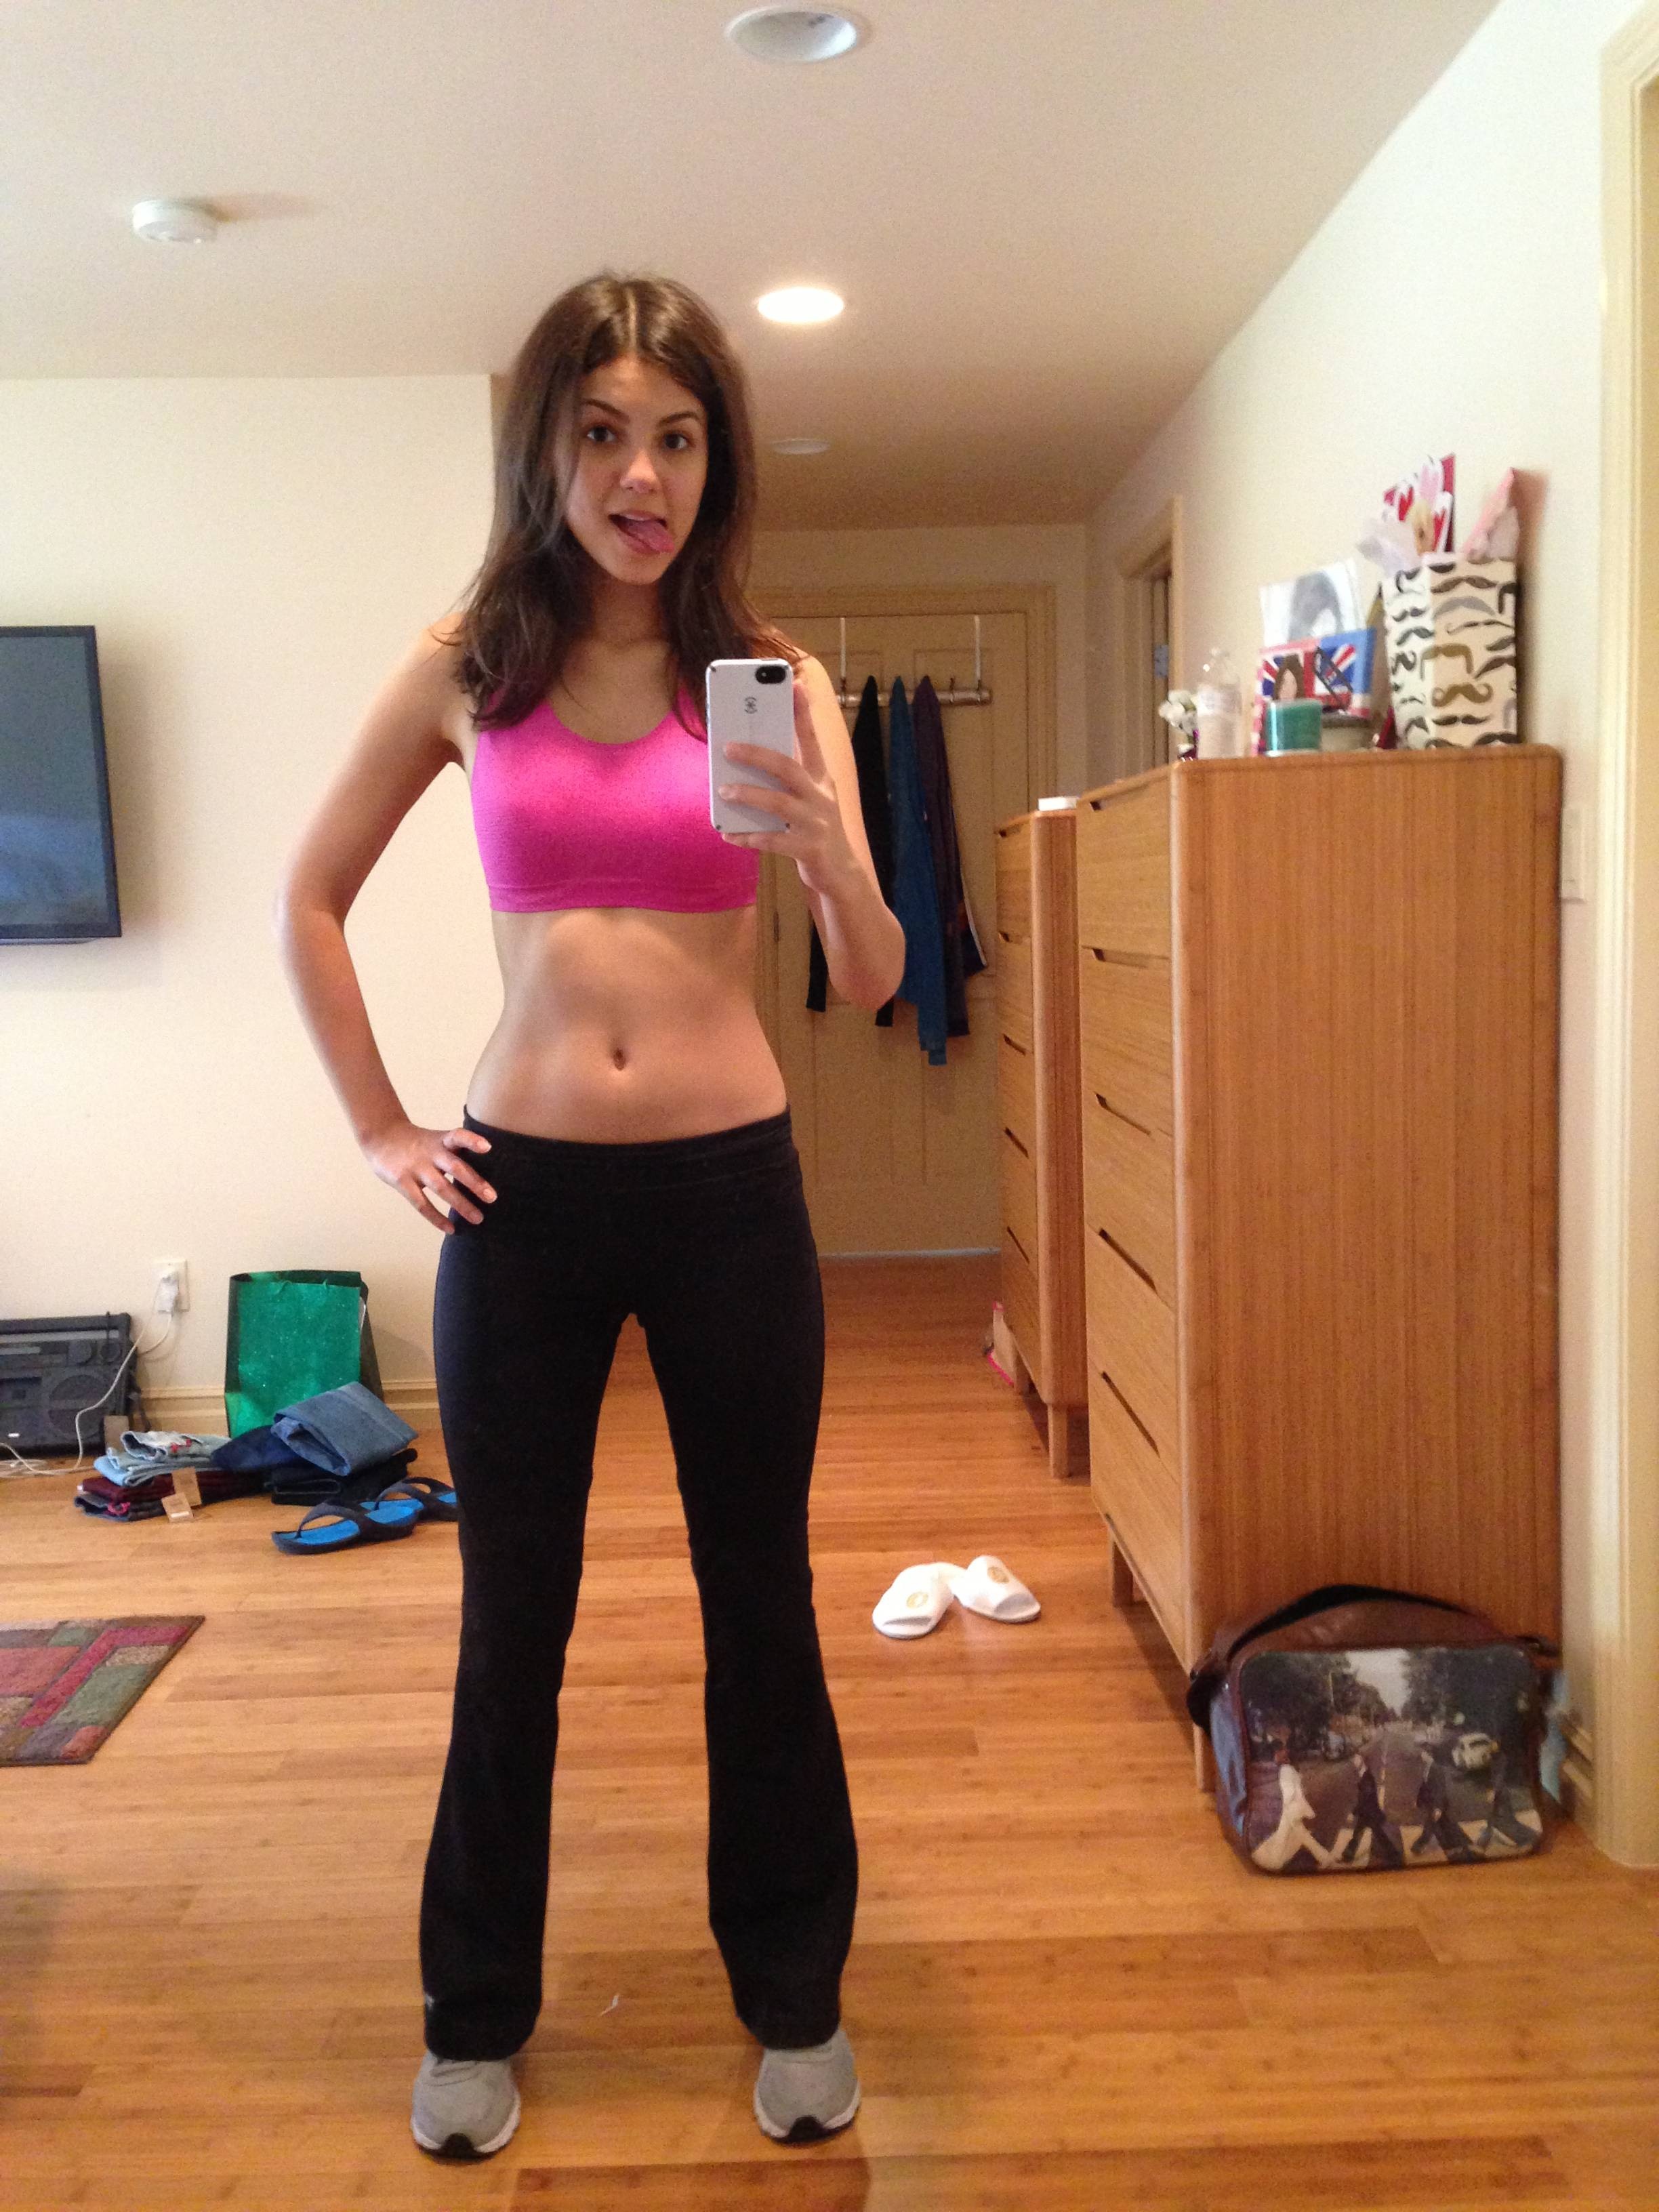 Victoria Justice Pictures. Hotness Rating = Unrated